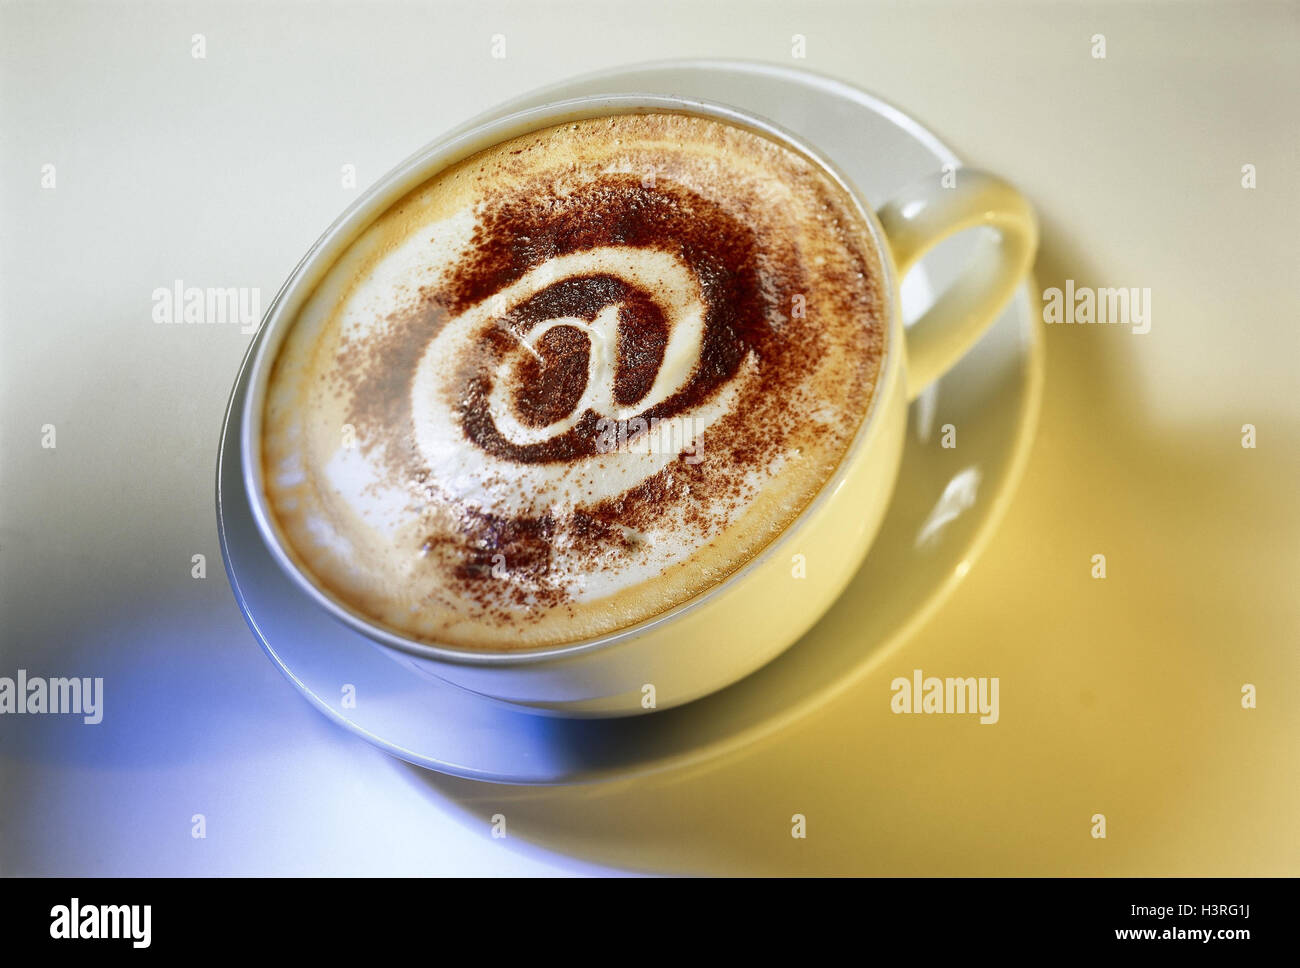 Icon, Internet cafe e-mail At sign, at symbol, Internet, Electronic message, mail server, e-mail address, telecommunication, connection, service, accessibility, identification, chat coffee cup, cup, cappuccino, coffee, drink, lacteal froth, at-sign Stock Photo